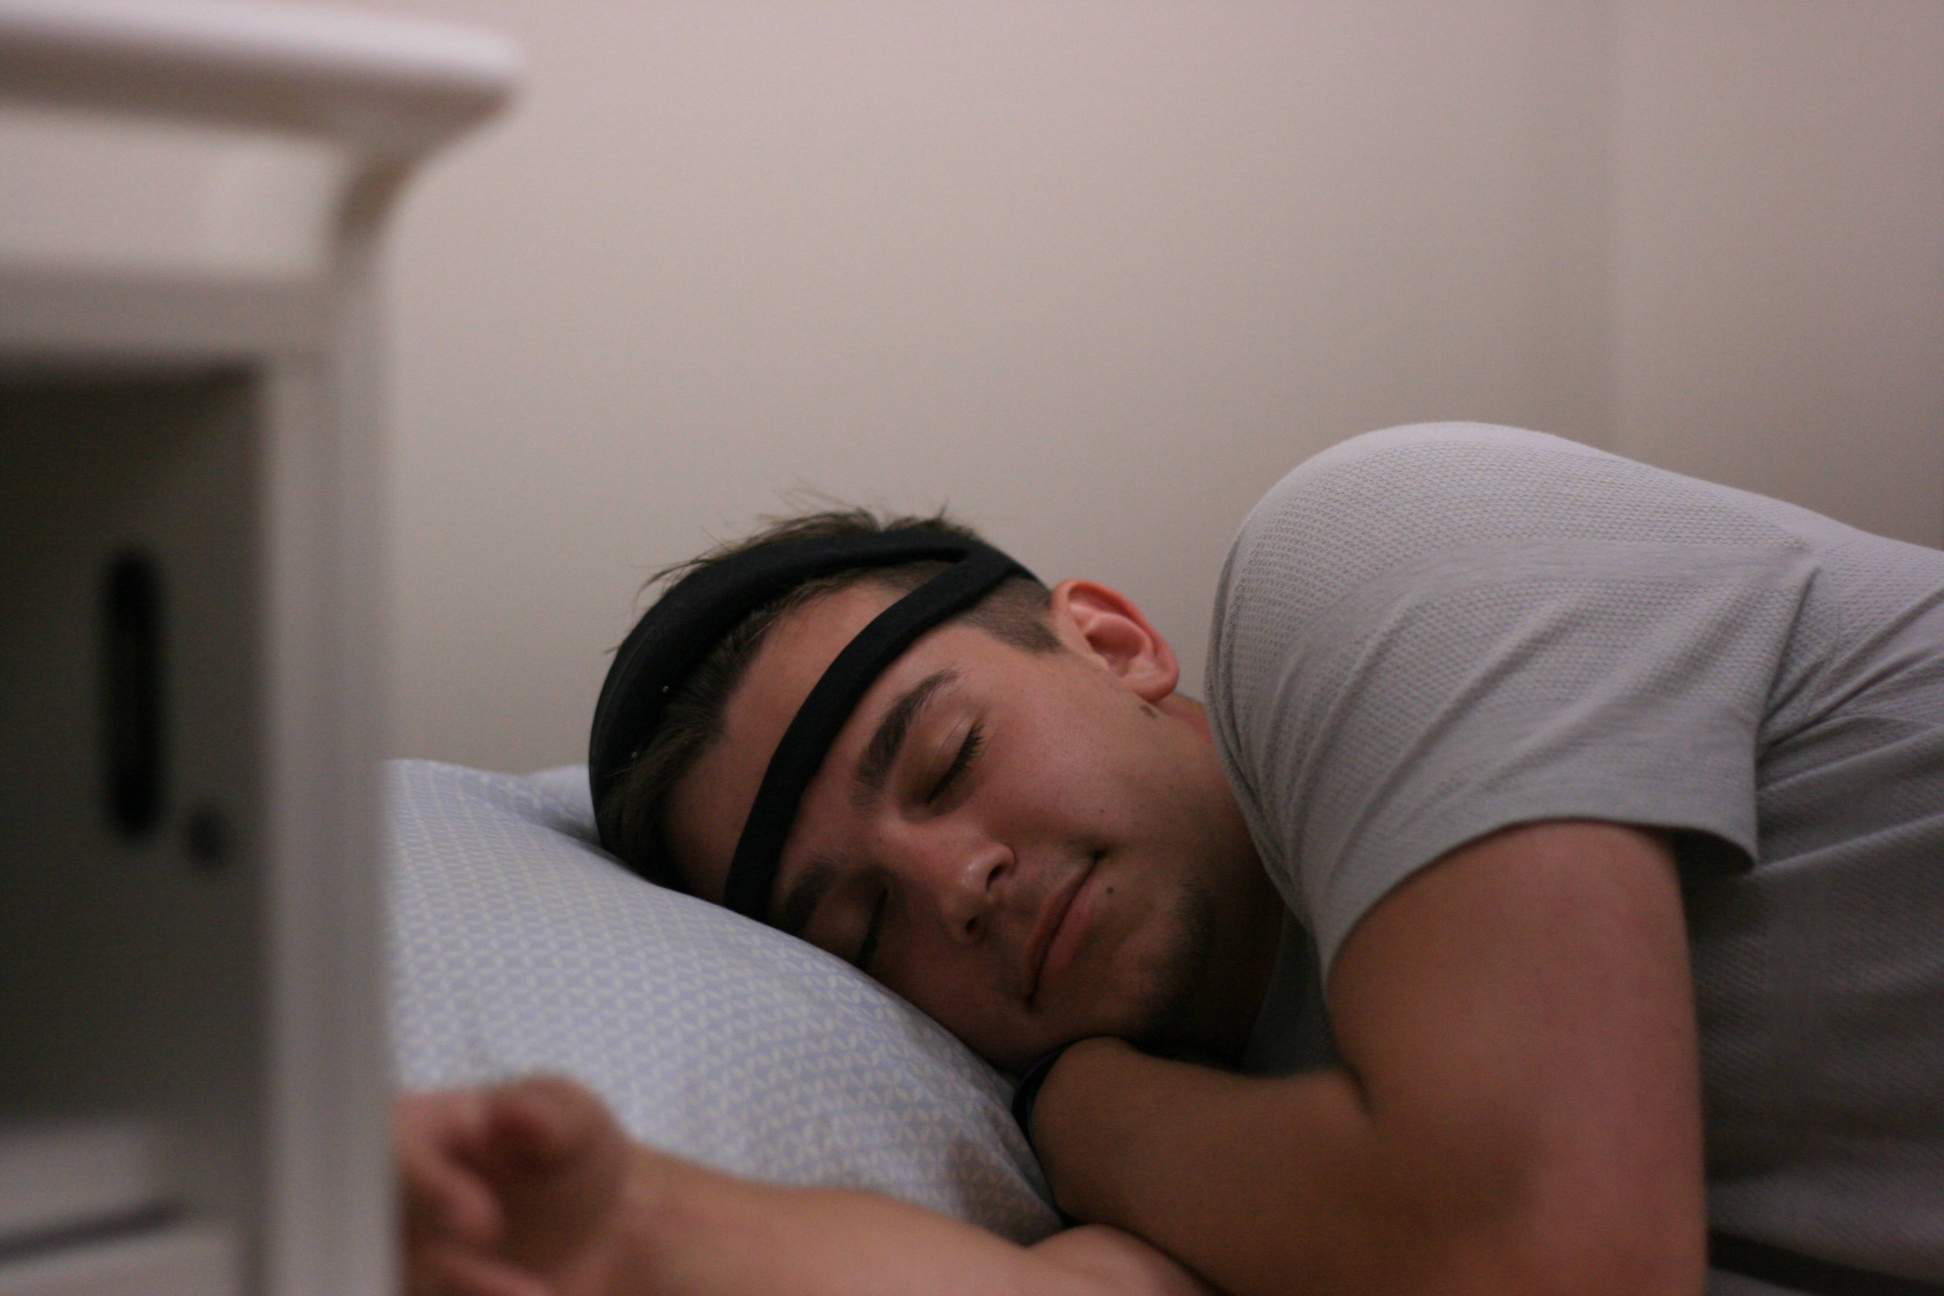 2.	Undergraduate research assistant in Dr. Westerberg’s lab, Gage Smith, demonstrates how to sleep while wearing the sleep recording headband. 